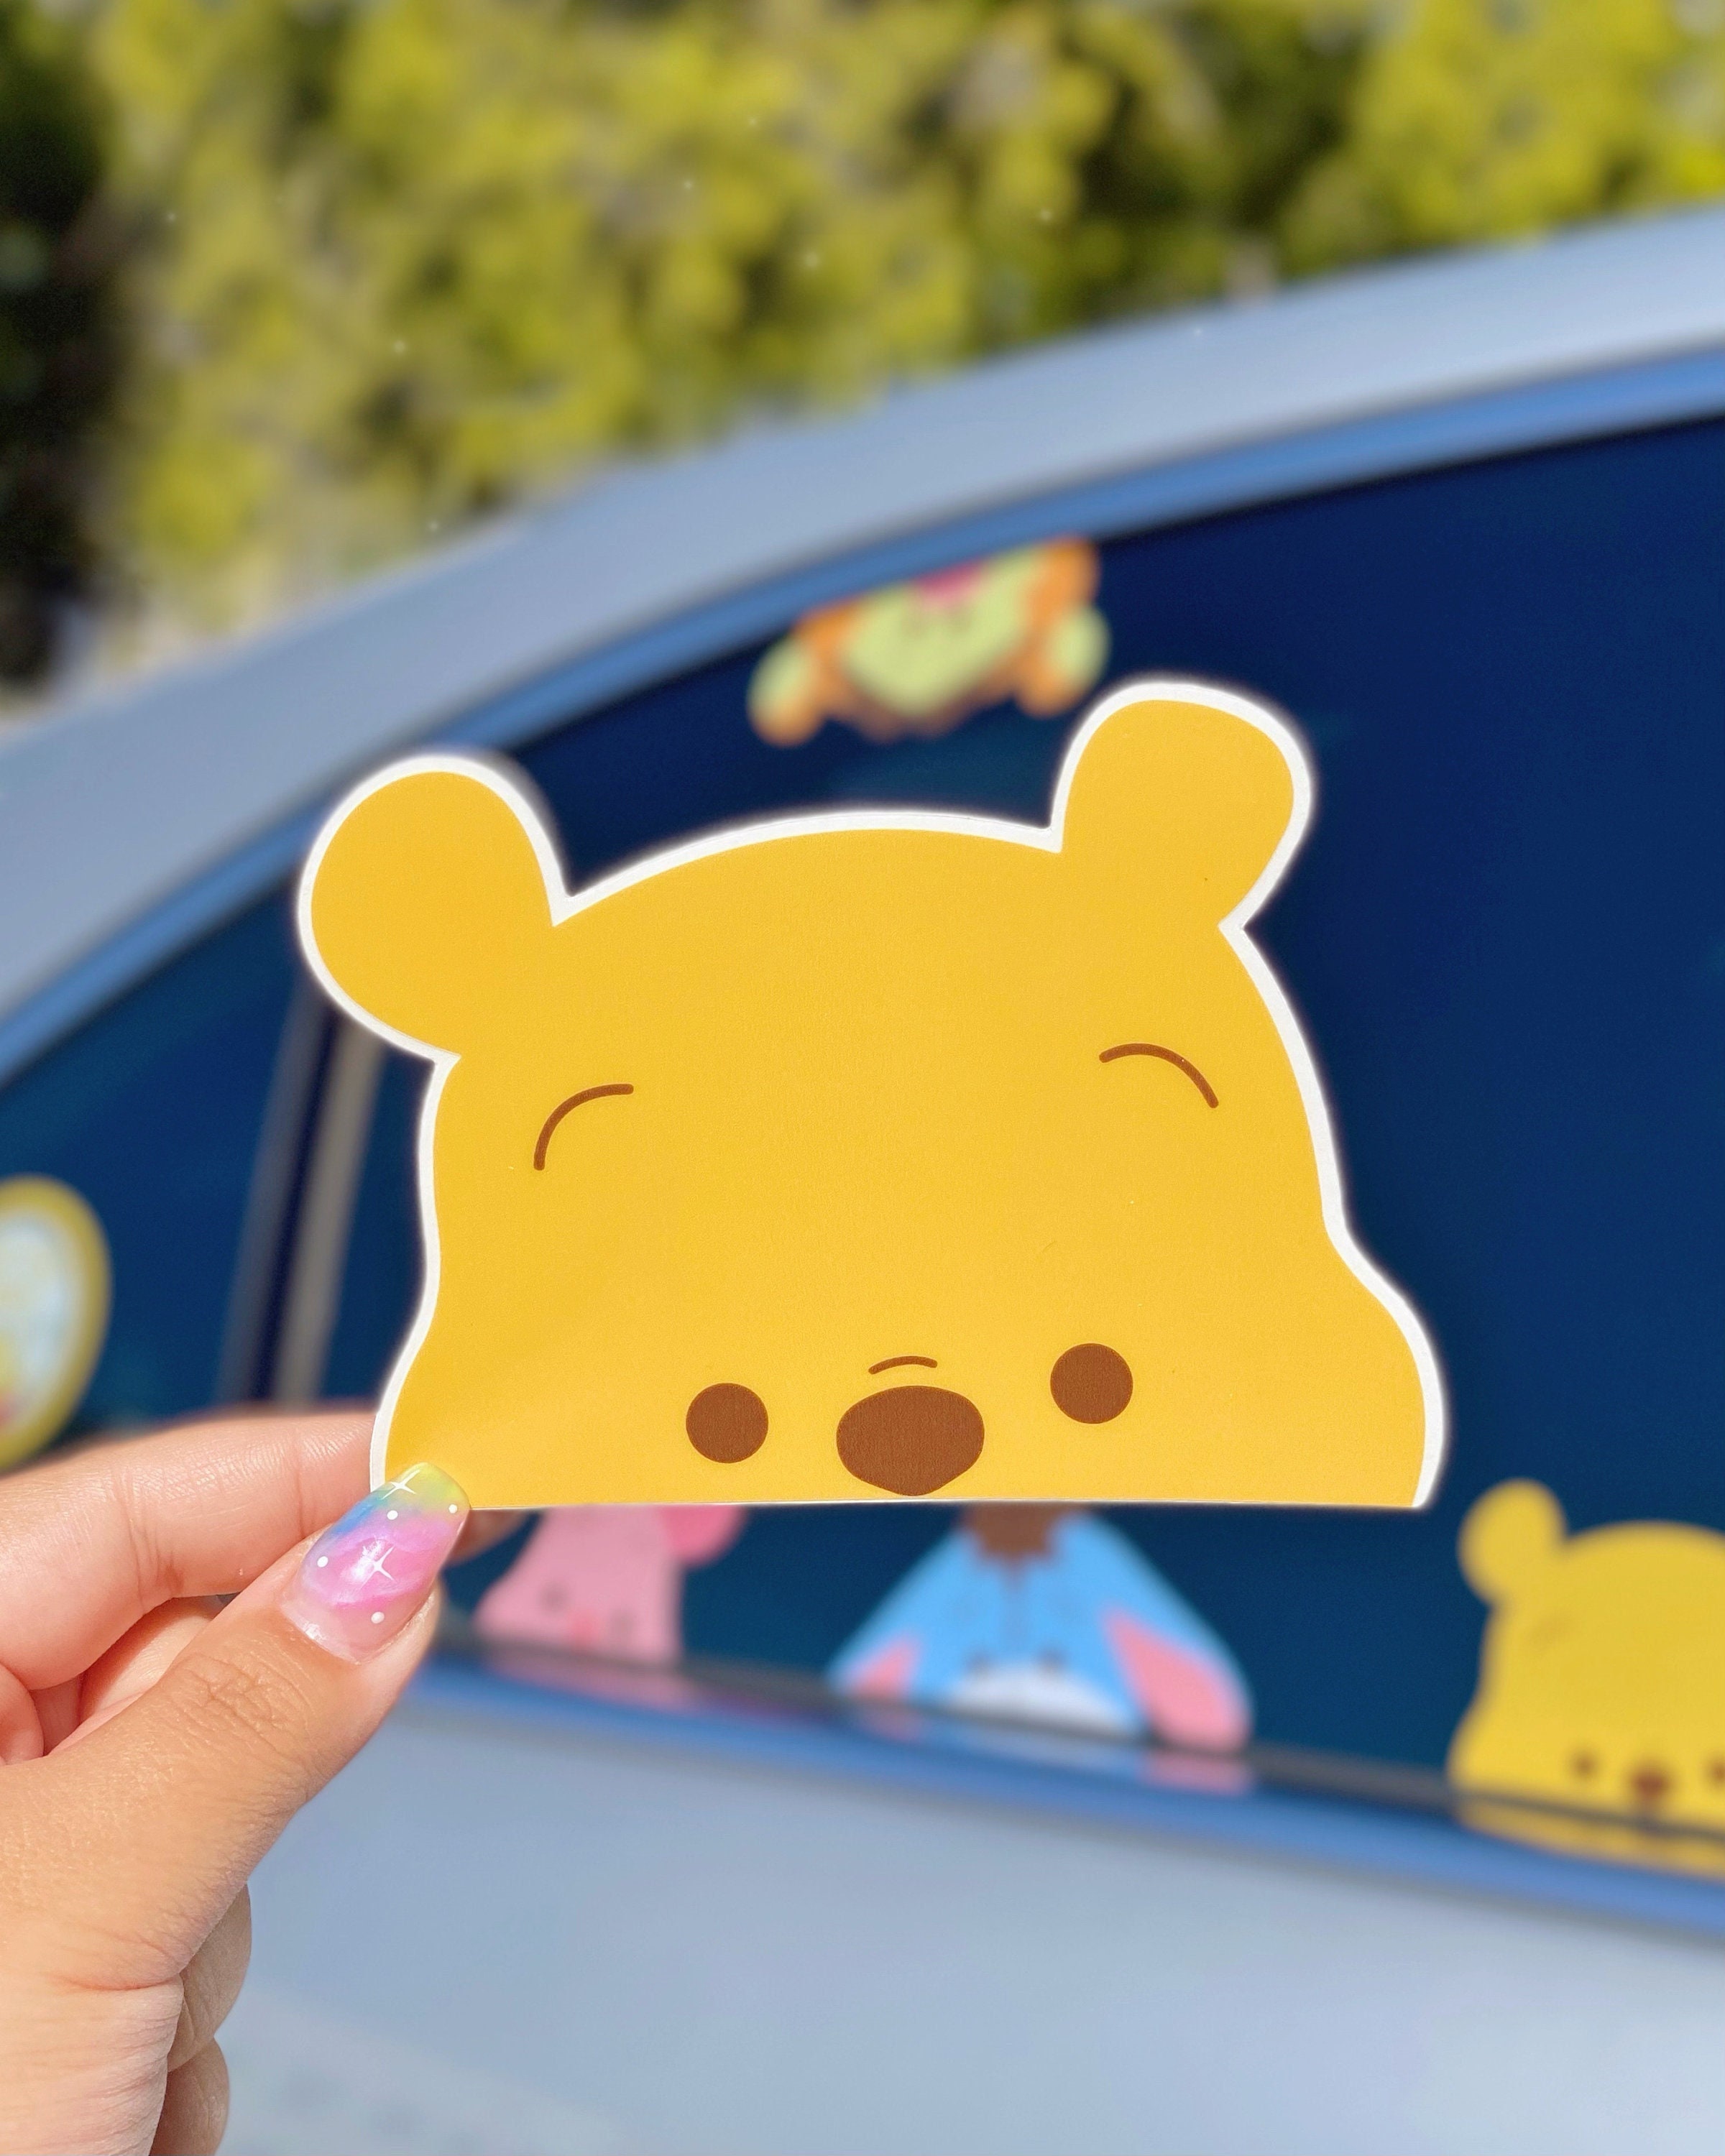 Winnie The Pooh Stickers 50pcs PVC Waterproof Cute Disney Vinyl Decals Stickers Piglet Eeyore Pooh Bear Tigger Stickers Gift for Teen Boy and Girls